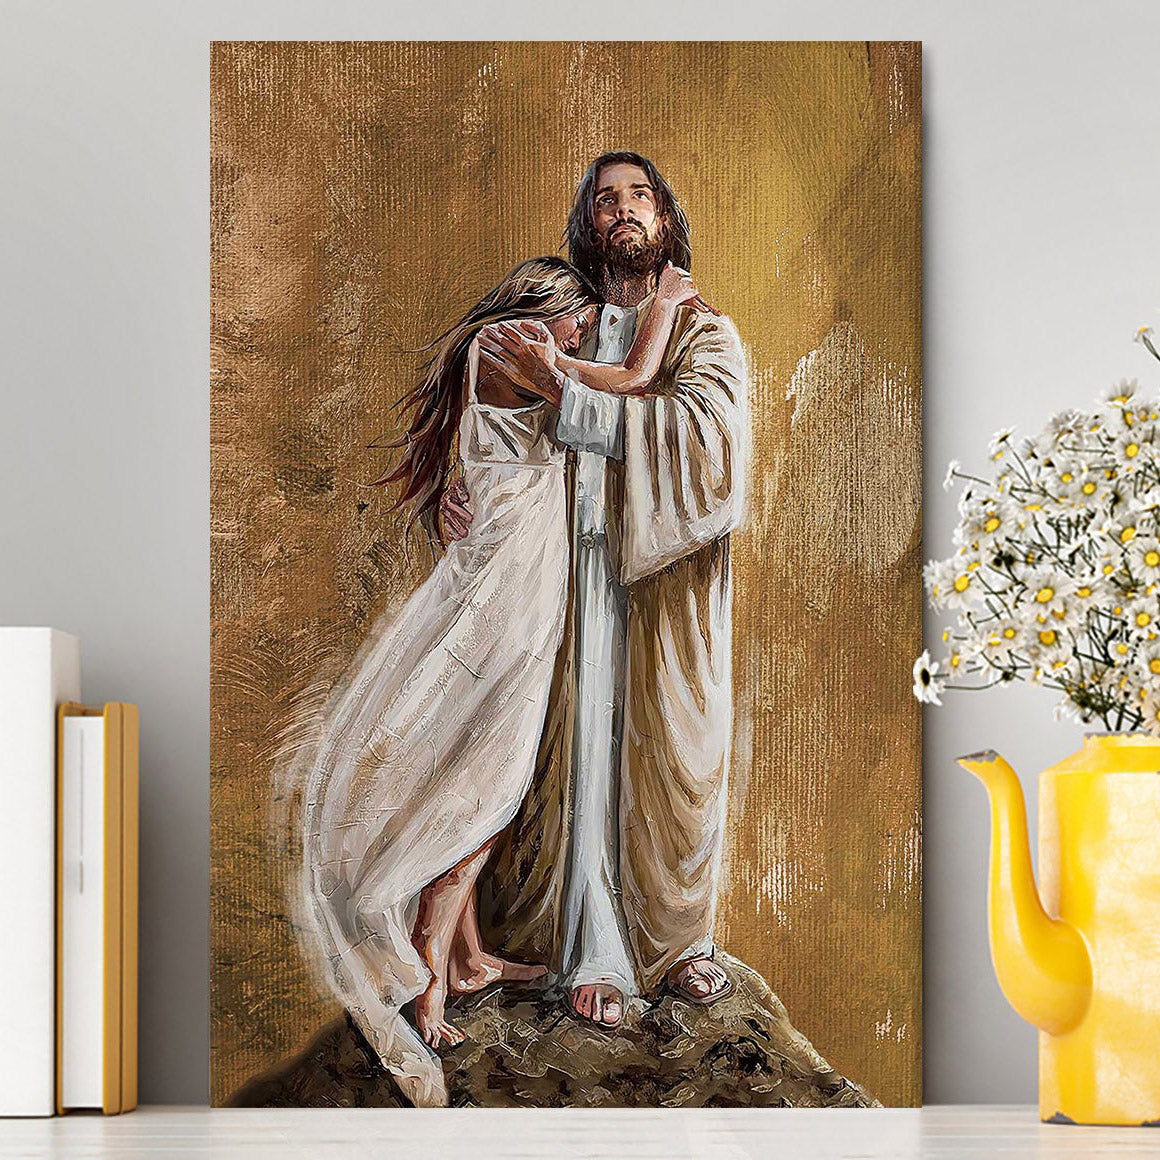 Jesus Hug In The Arms Of His Love Canvas Art - Christian Art - Bible Verse Wall Art - Religious Home Decor